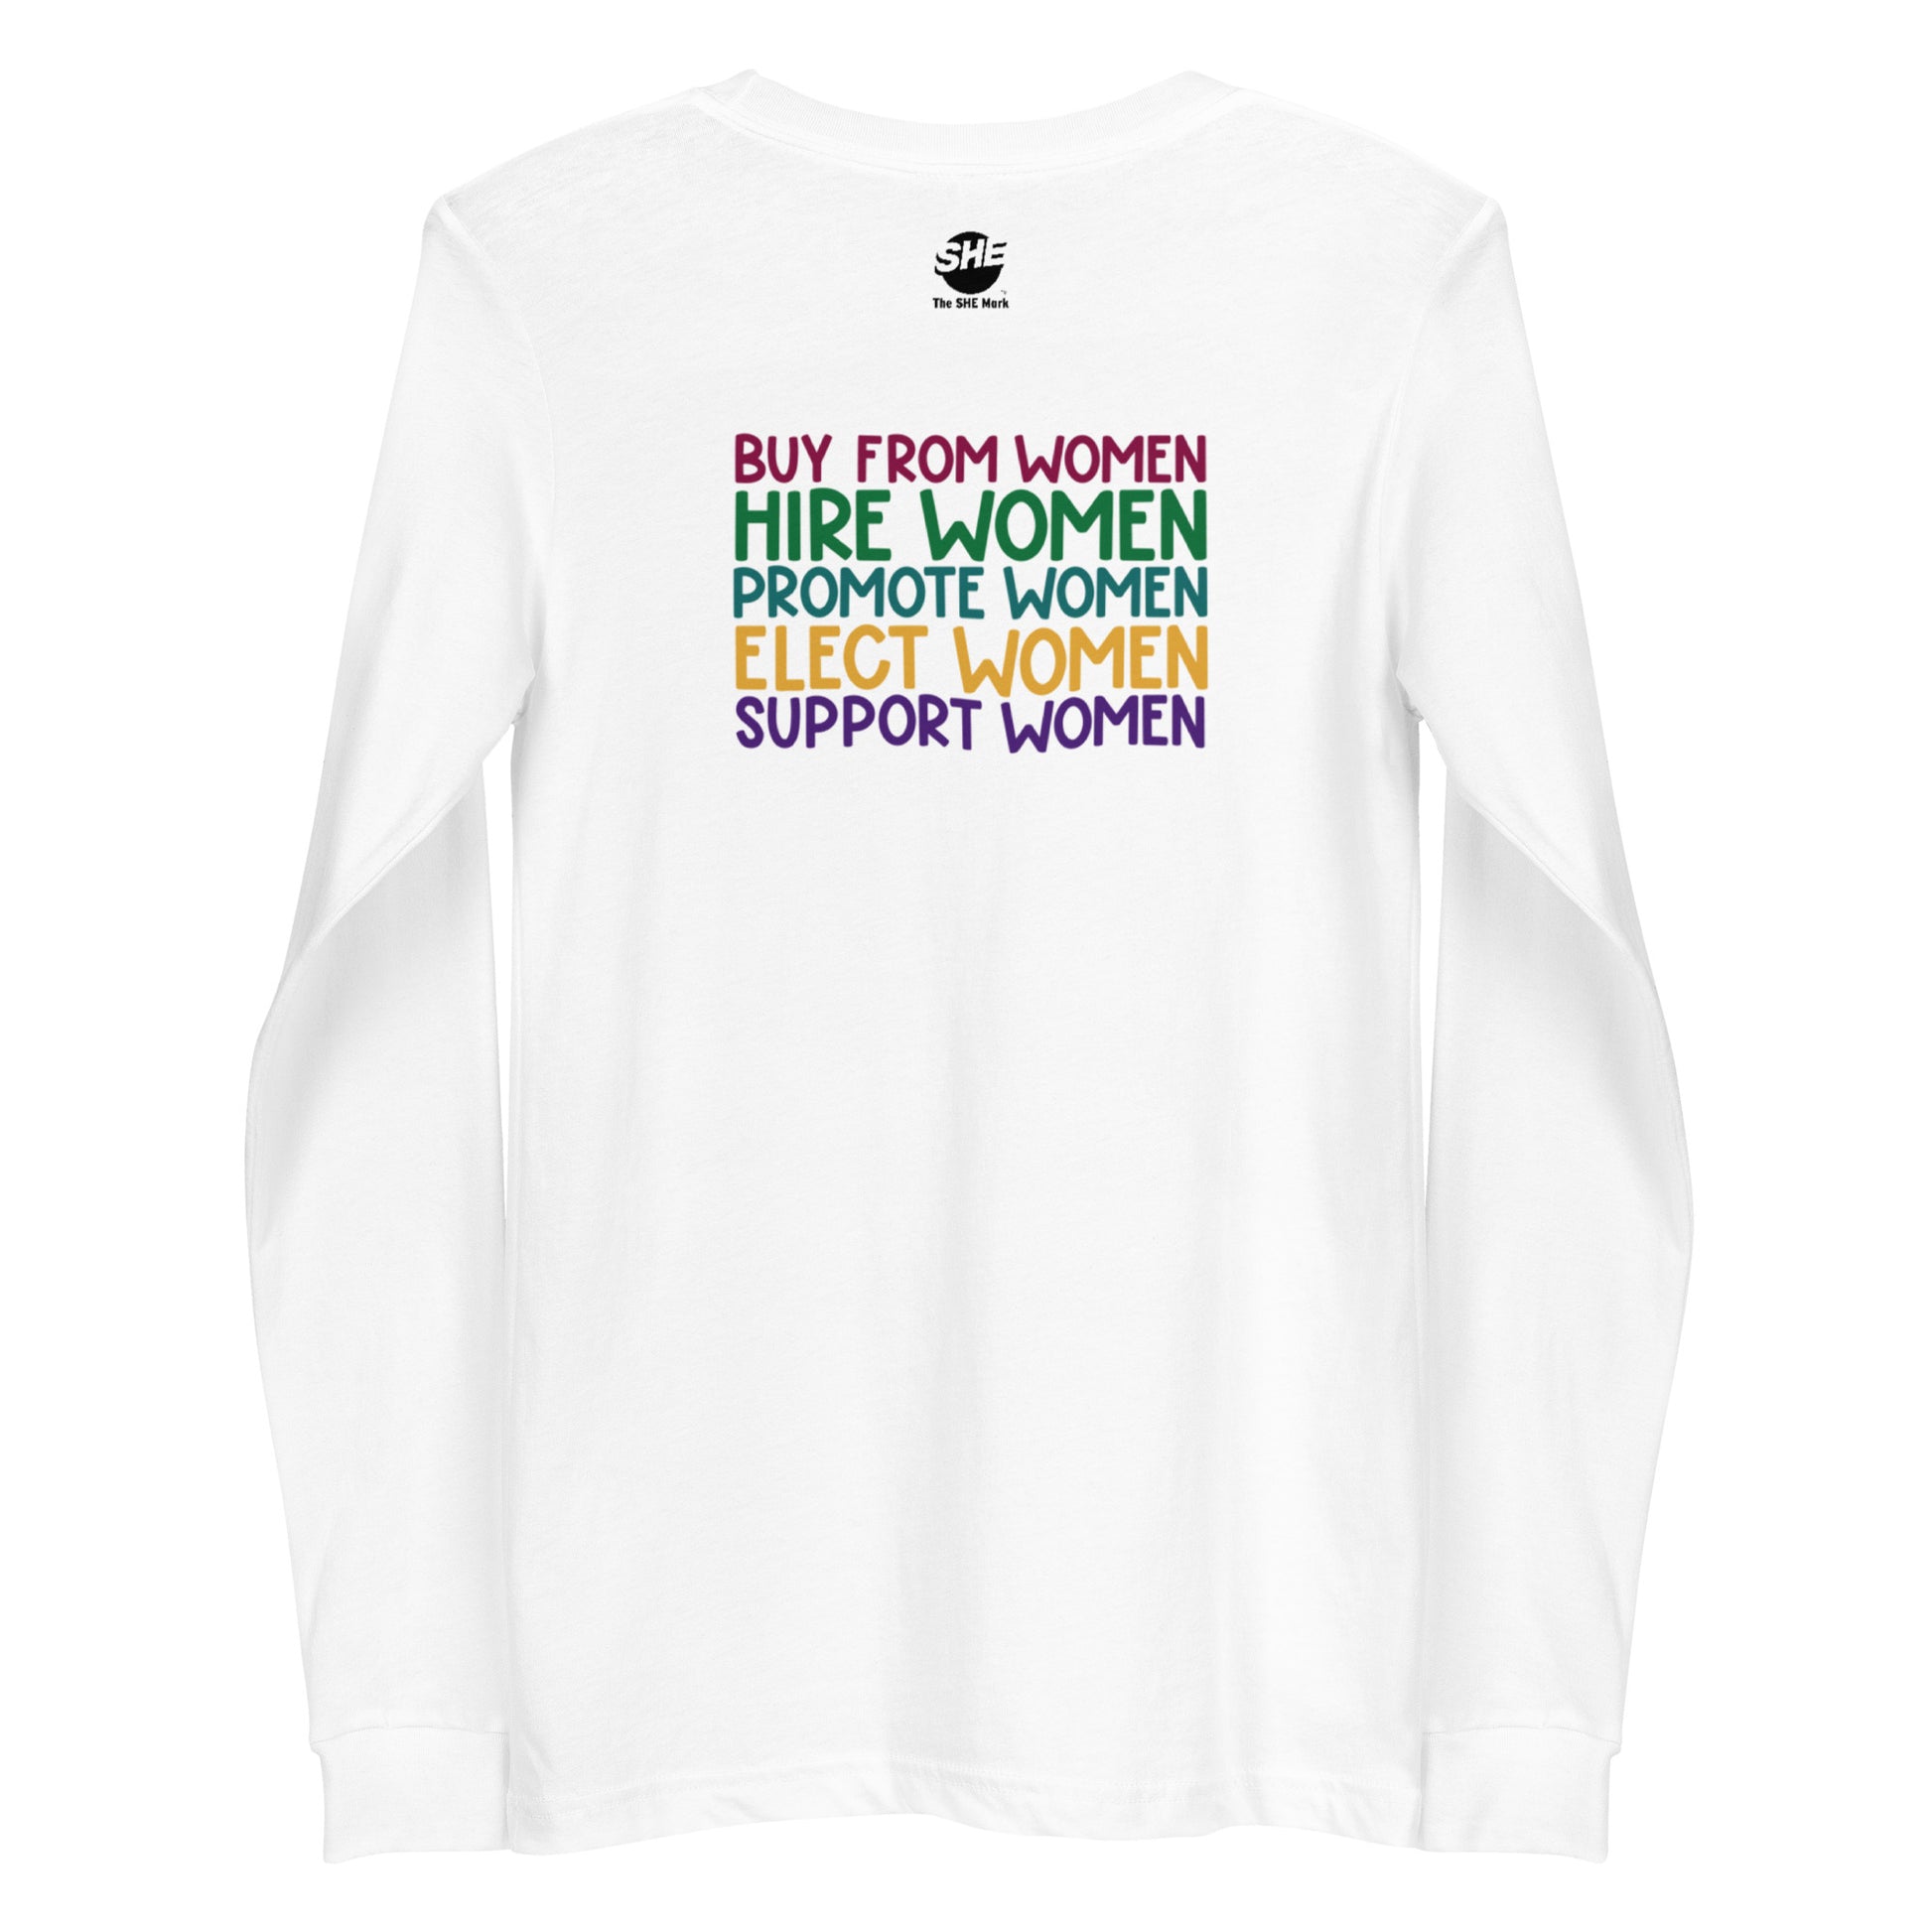 White long-sleeve crew neck shirt printed on the back with "Buy from women" in ruby, followed by "Hire women" in green, "Promote women" in teal, "Elect women" in gold, and "Support women" in purple.  Above it is The SHE Mark logo in black and the words 'The SHE Mark" below it.